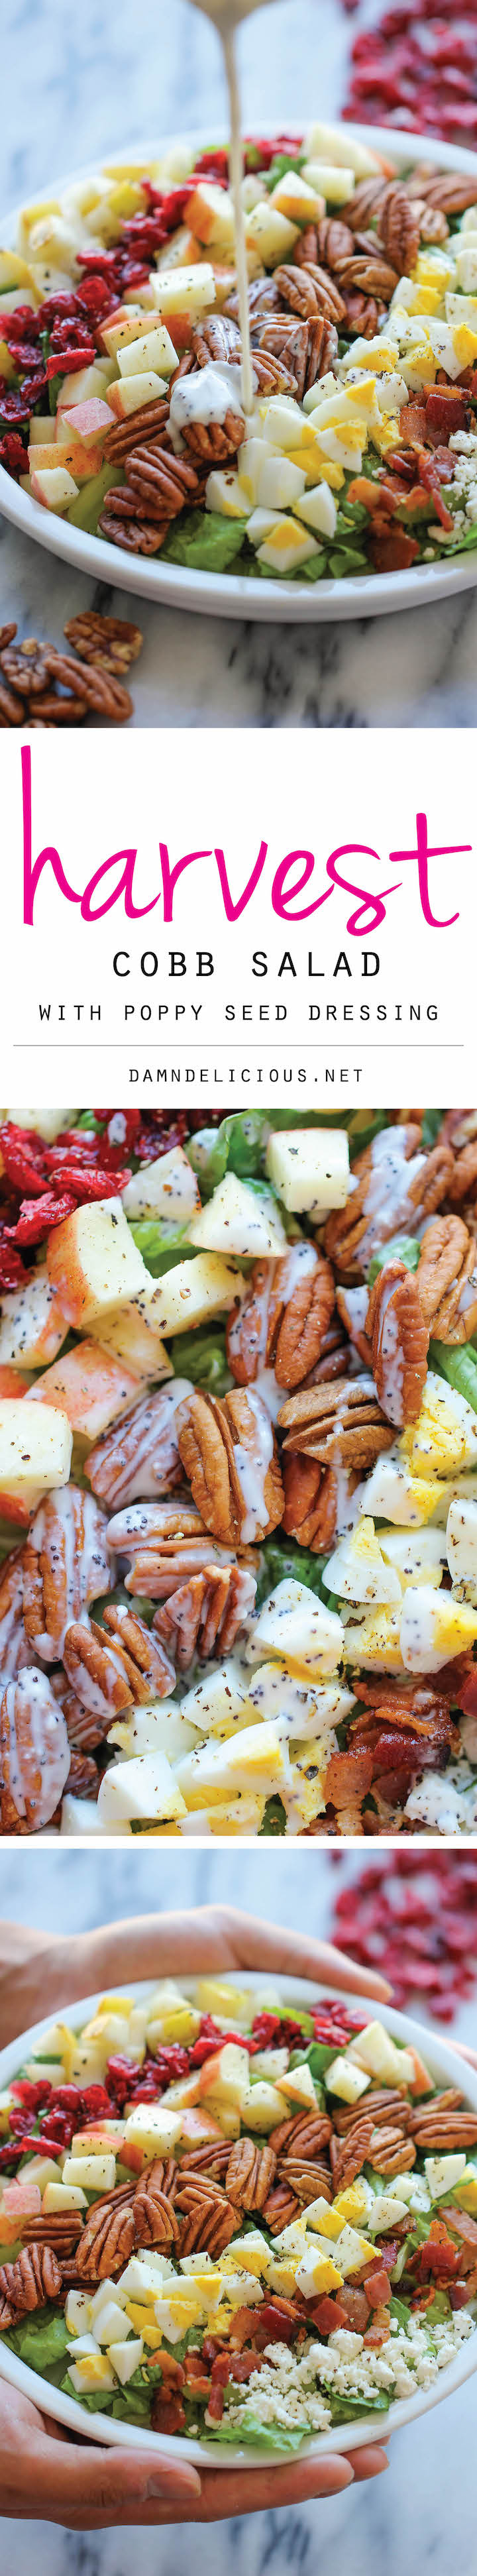 Harvest Cobb Salad - The perfect fall salad with the creamiest poppy seed salad dressing. So good, you'll want to make this all year long!